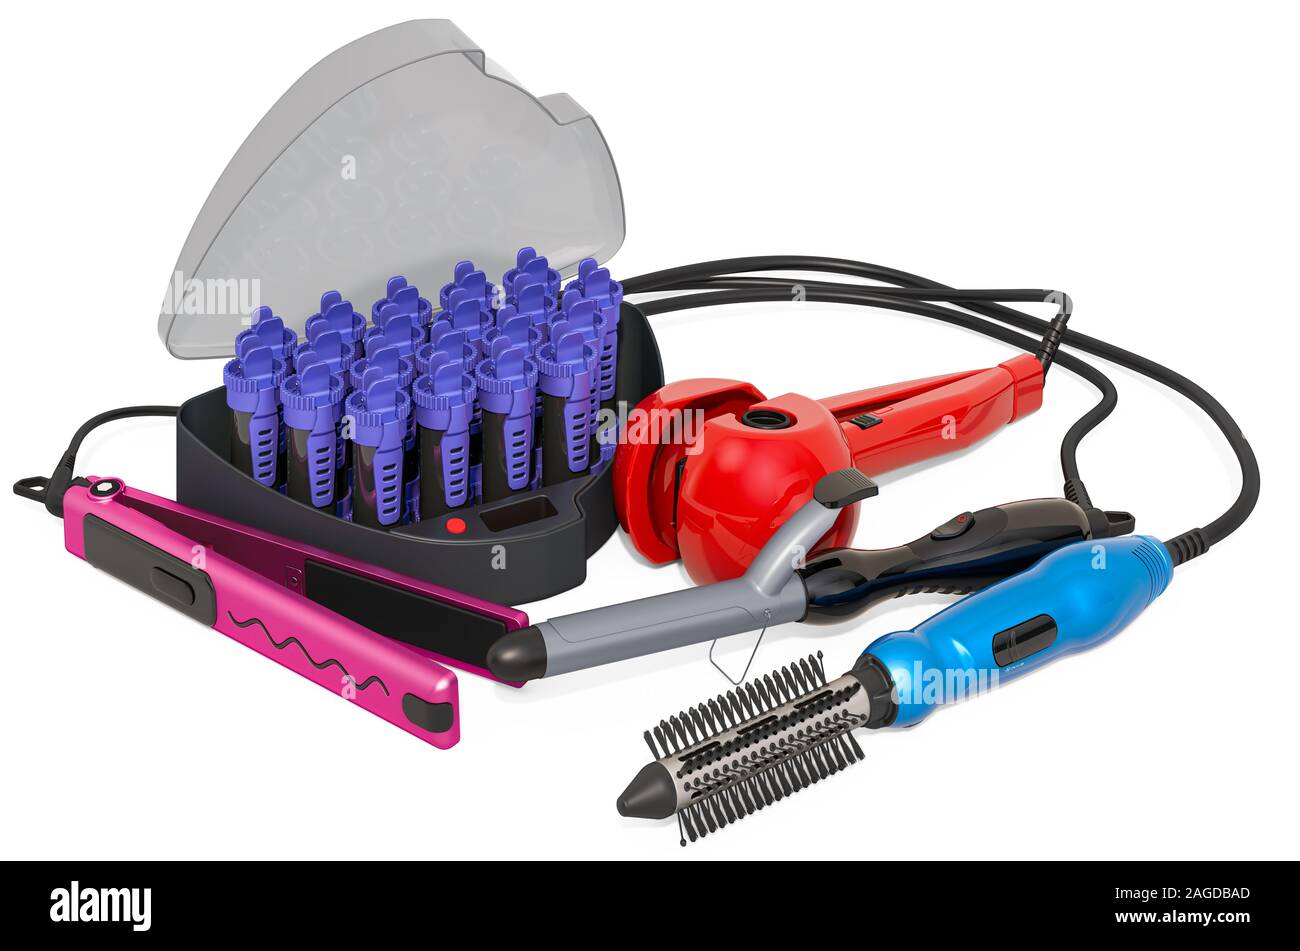 Styling Tools and Appliances. Flat Iron Hair Straightener, Hair Dryer Hot  Air Brush, Curling Iron Hair Curler, Steam Ceramic Curling Wand and Compact  Stock Photo - Alamy